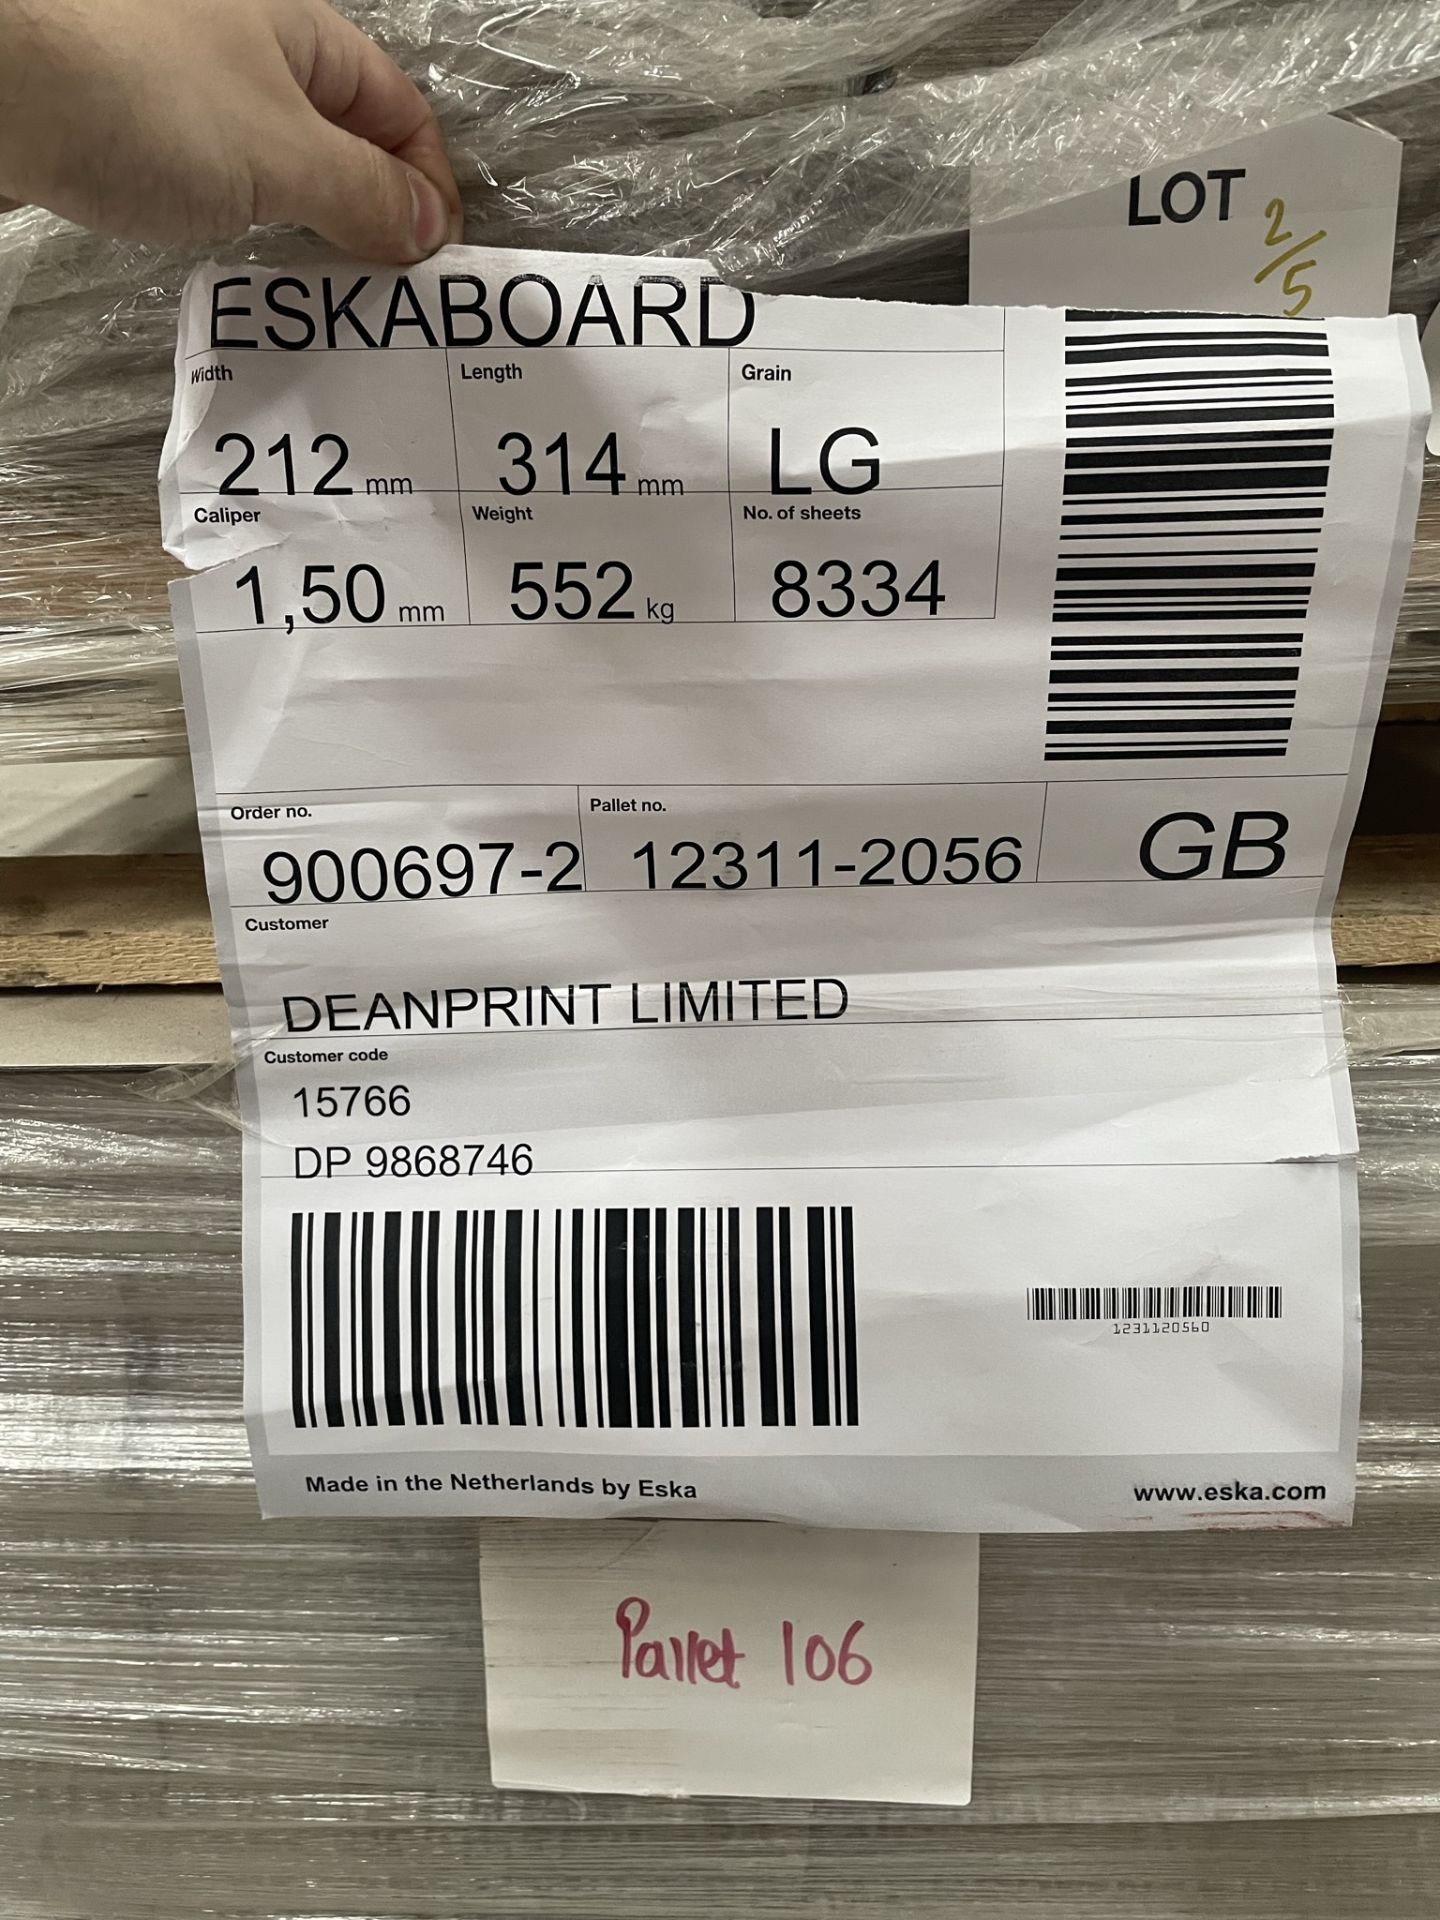 5 x Pallets of 1500 Micron Eskaboard | Approximately 18,600 Sheets | Various Sizes - Image 2 of 7